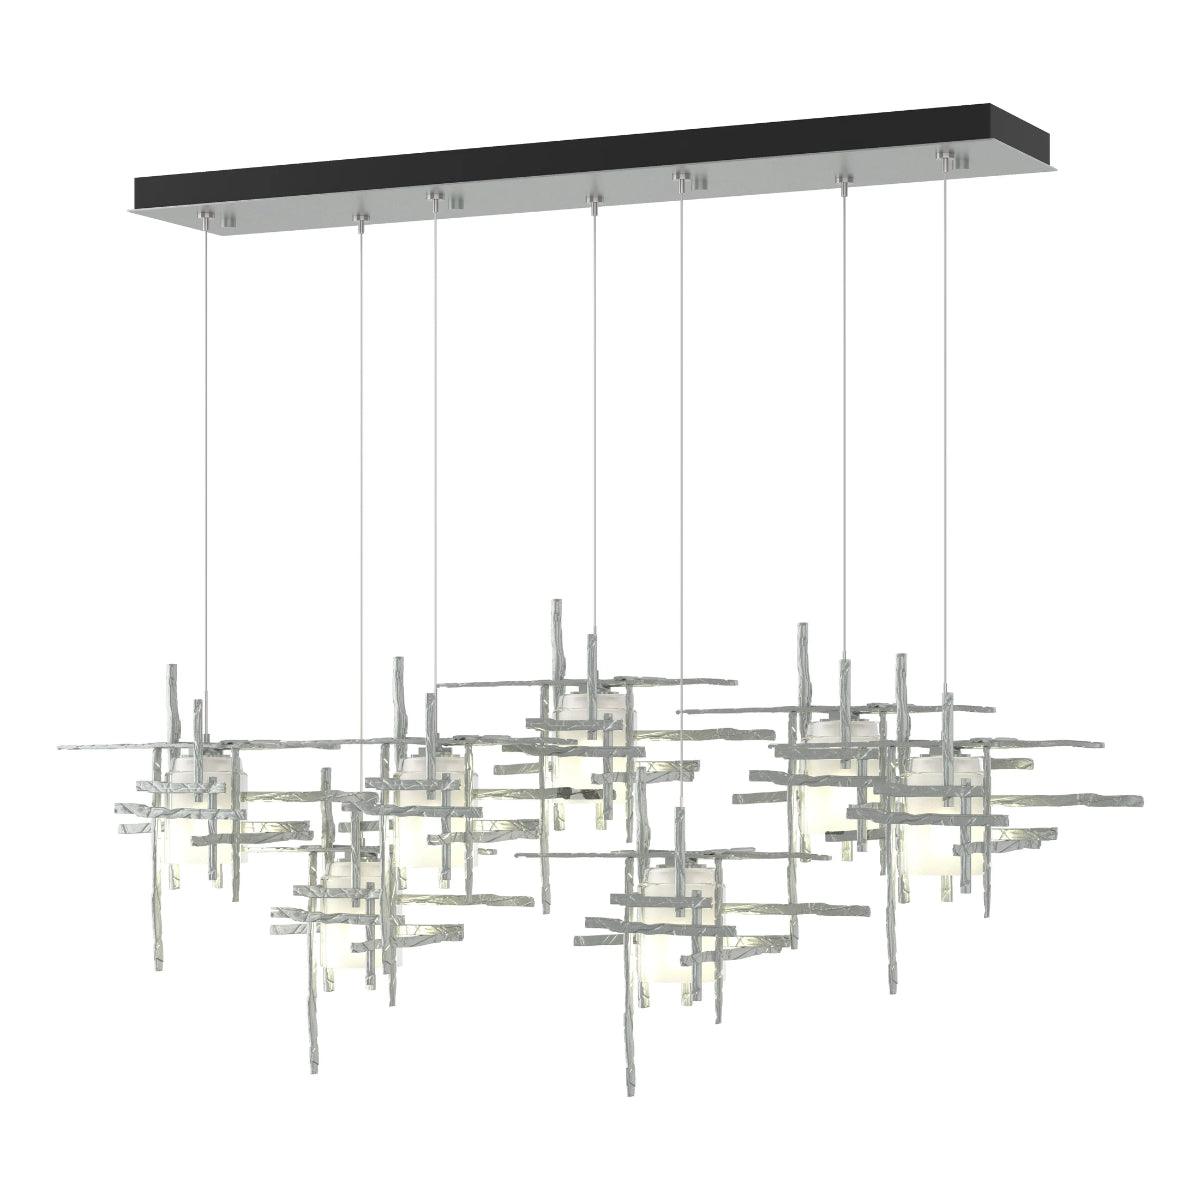 Tura 54 in. 7 Lights Linear Pendant Light with Standard Height Frosted Glass